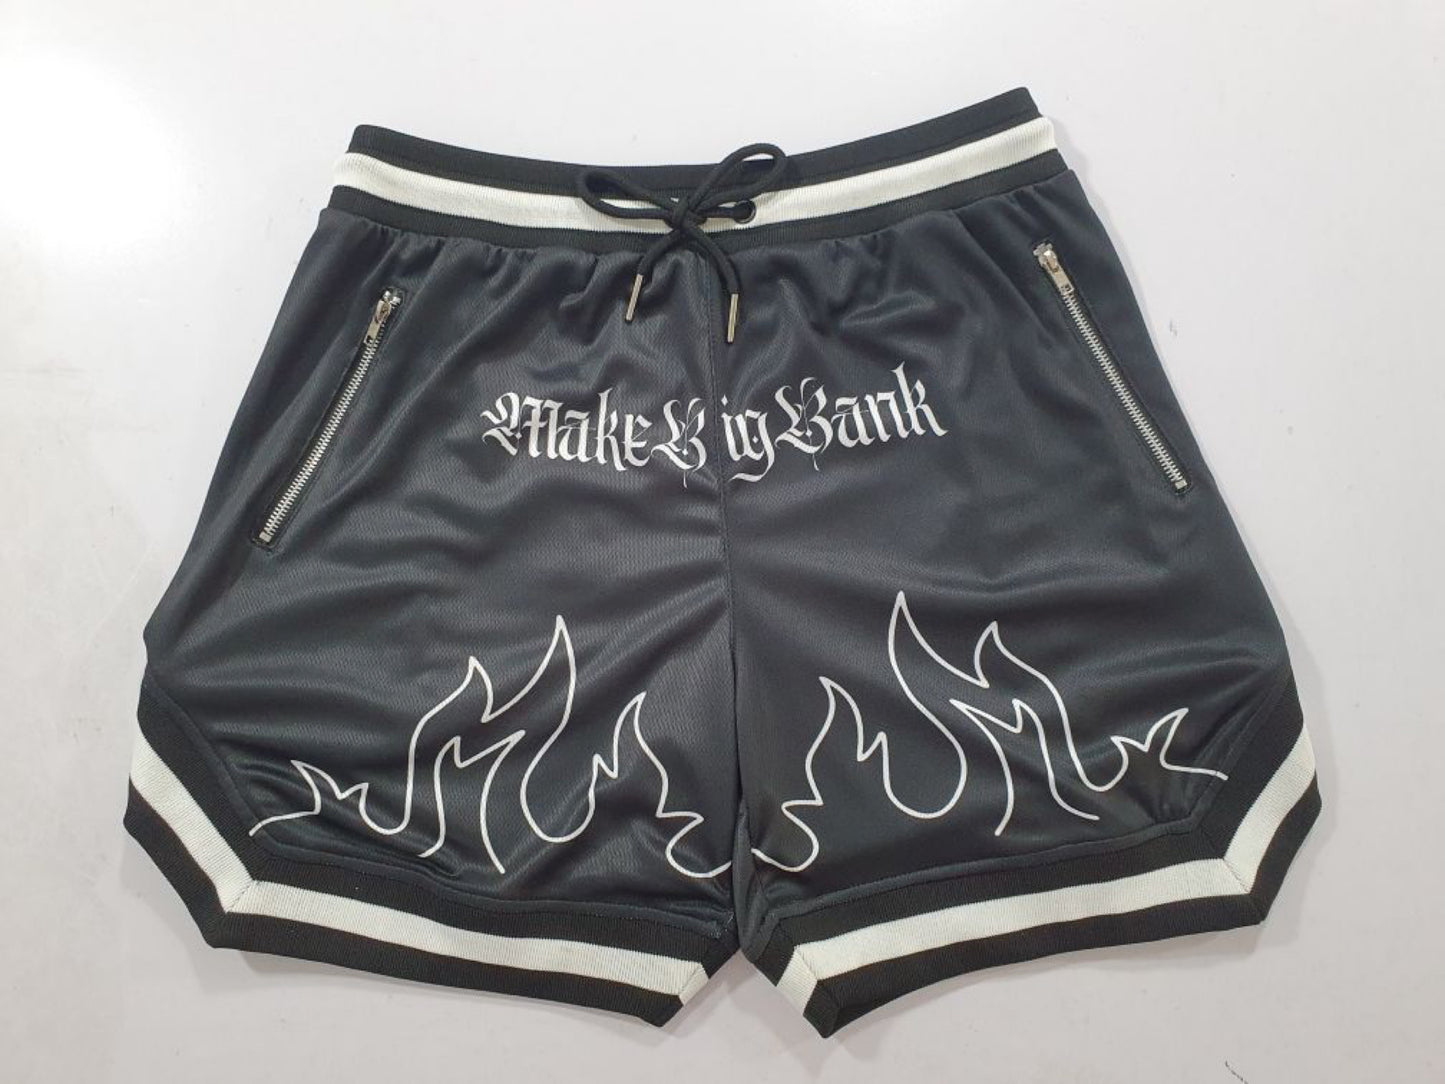 Flame Shorts